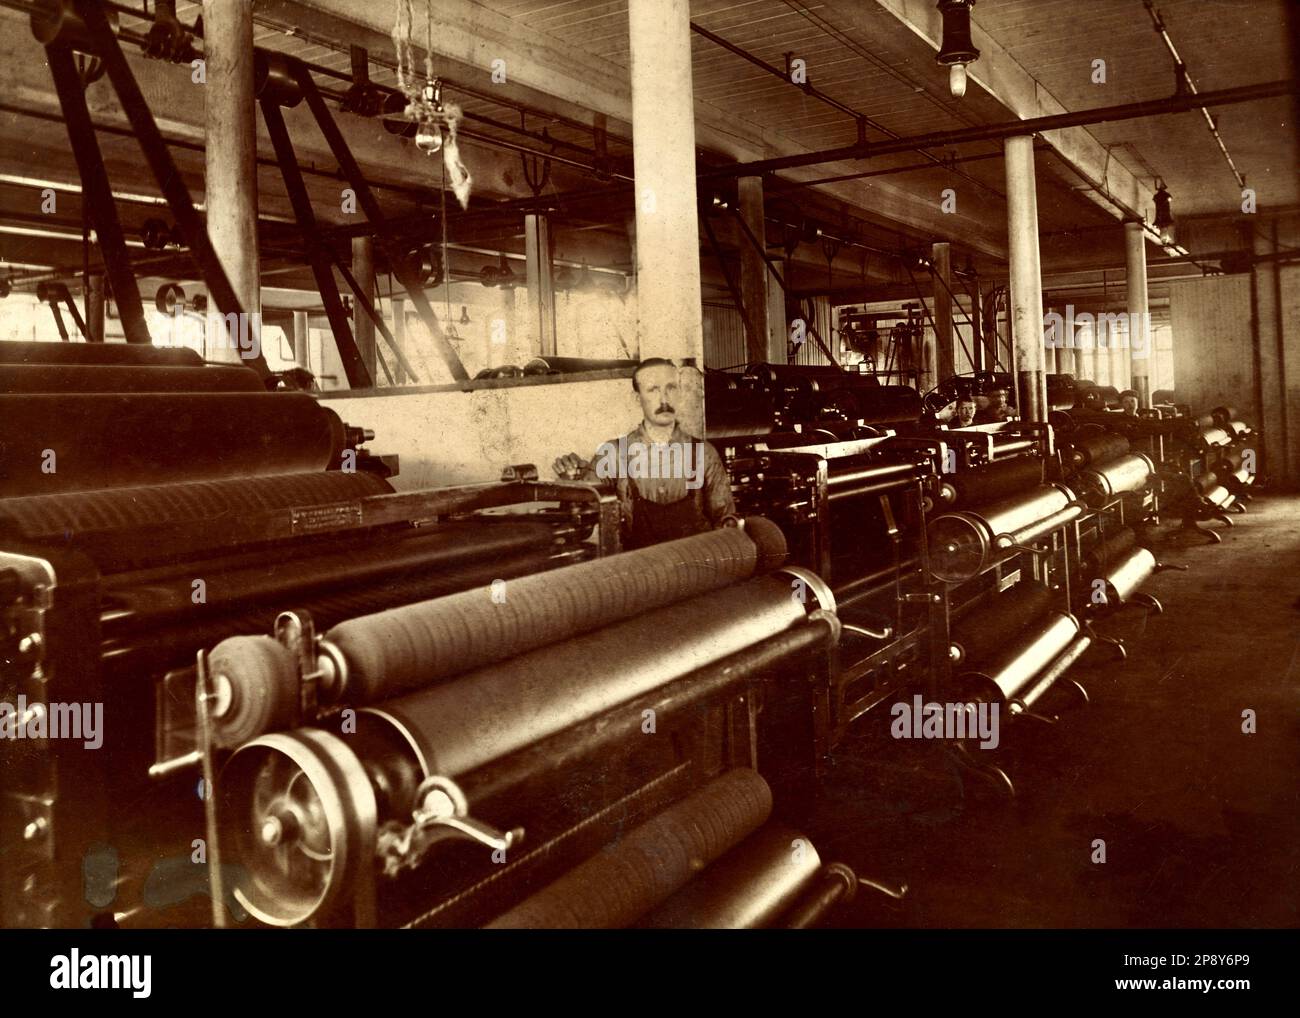 Vintage Printing Presses (maybe) early 1900s. Printing Machine, Printing Equipment, Newspaper Publisher? Turn of the Century Stock Photo